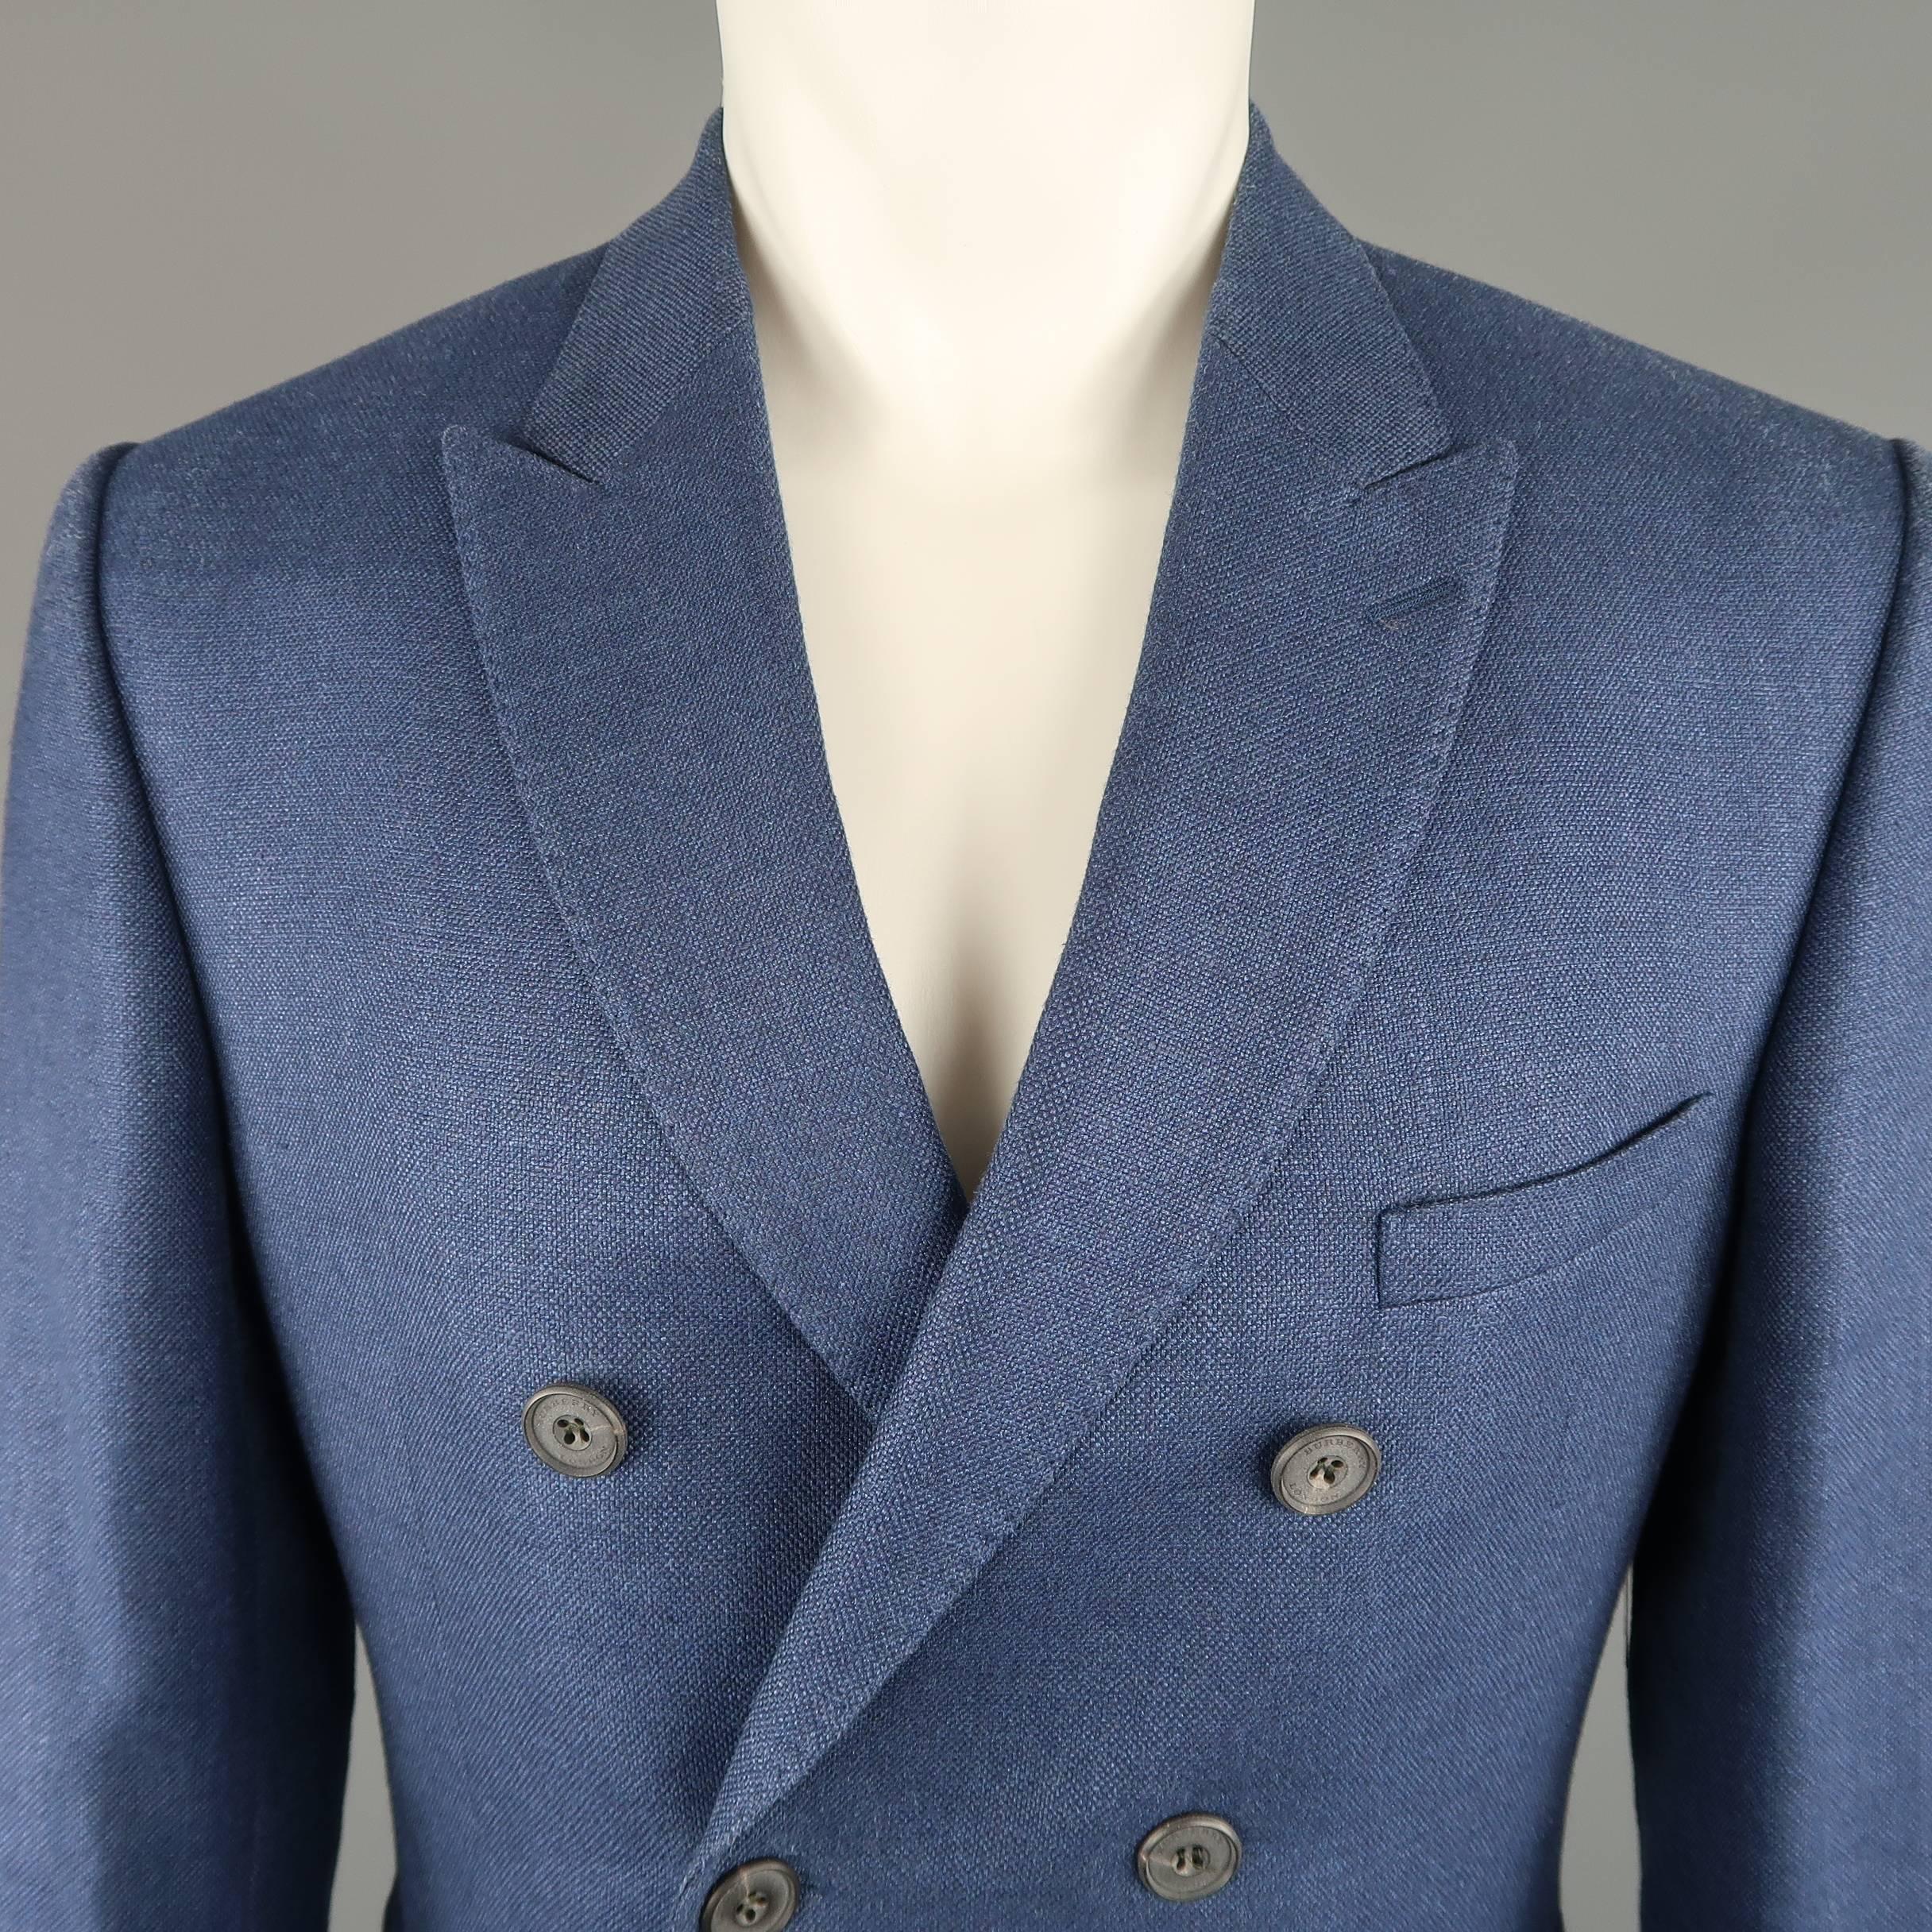 Double breasted BURBERRY LONDON sport coat comes in blue wool woven canvas with a peak lapel, and functional button cuffs. Wear on shoulders. As-is. Made in Portugal.
 
Good Pre-Owned Condition.
Marked: IT 52
 
Measurements:
 
Shoulder: 17